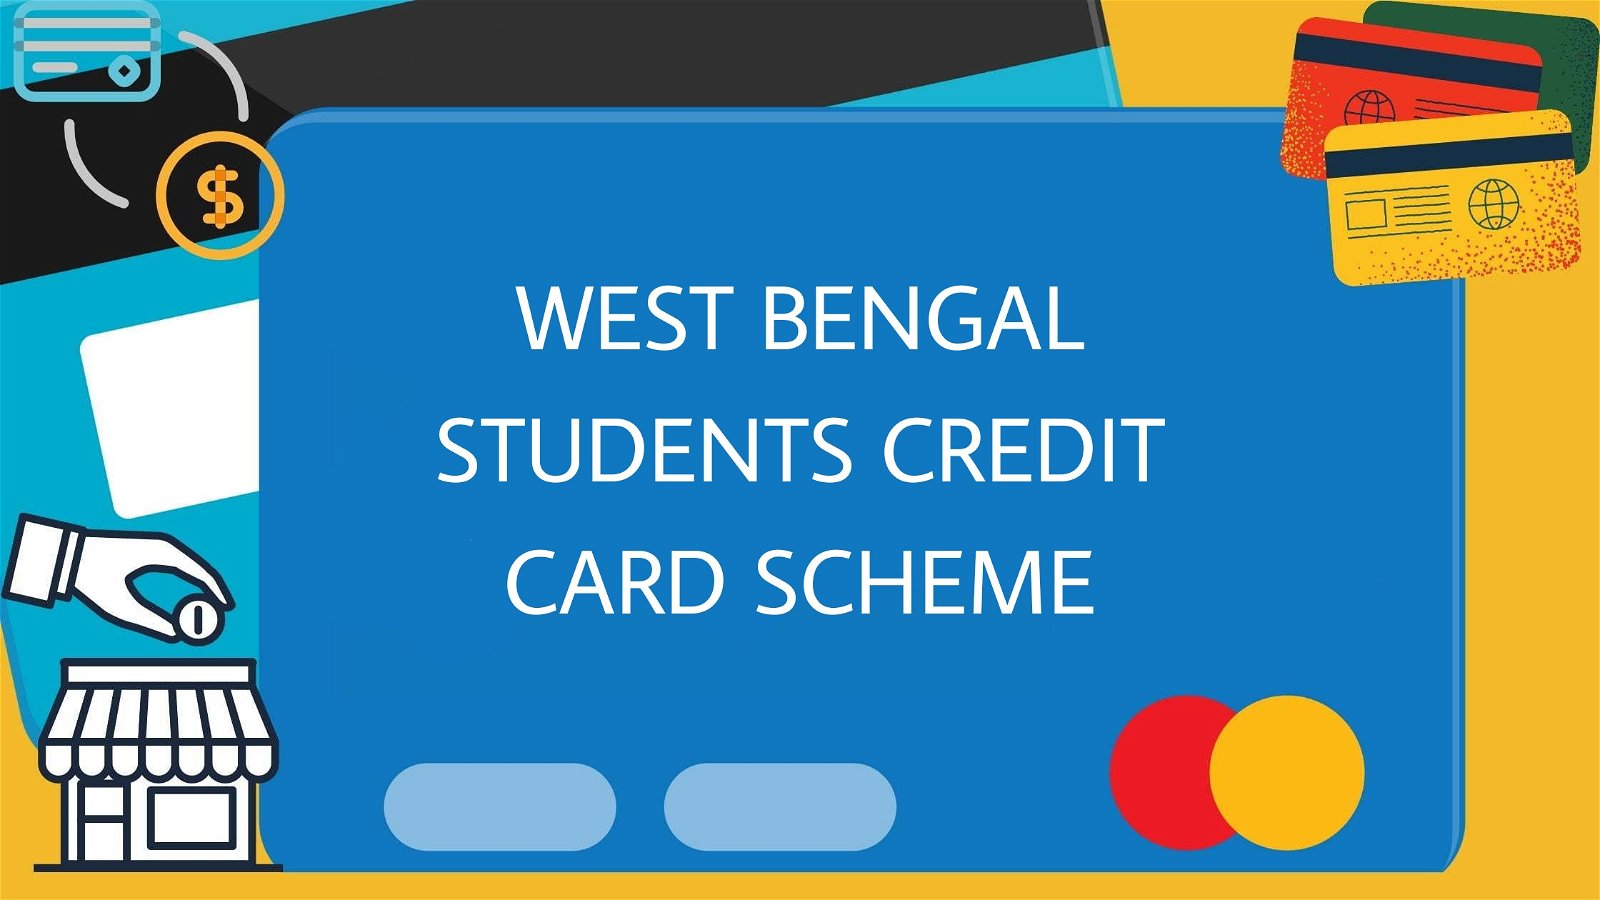 West Bengal approves Student Credit Card scheme